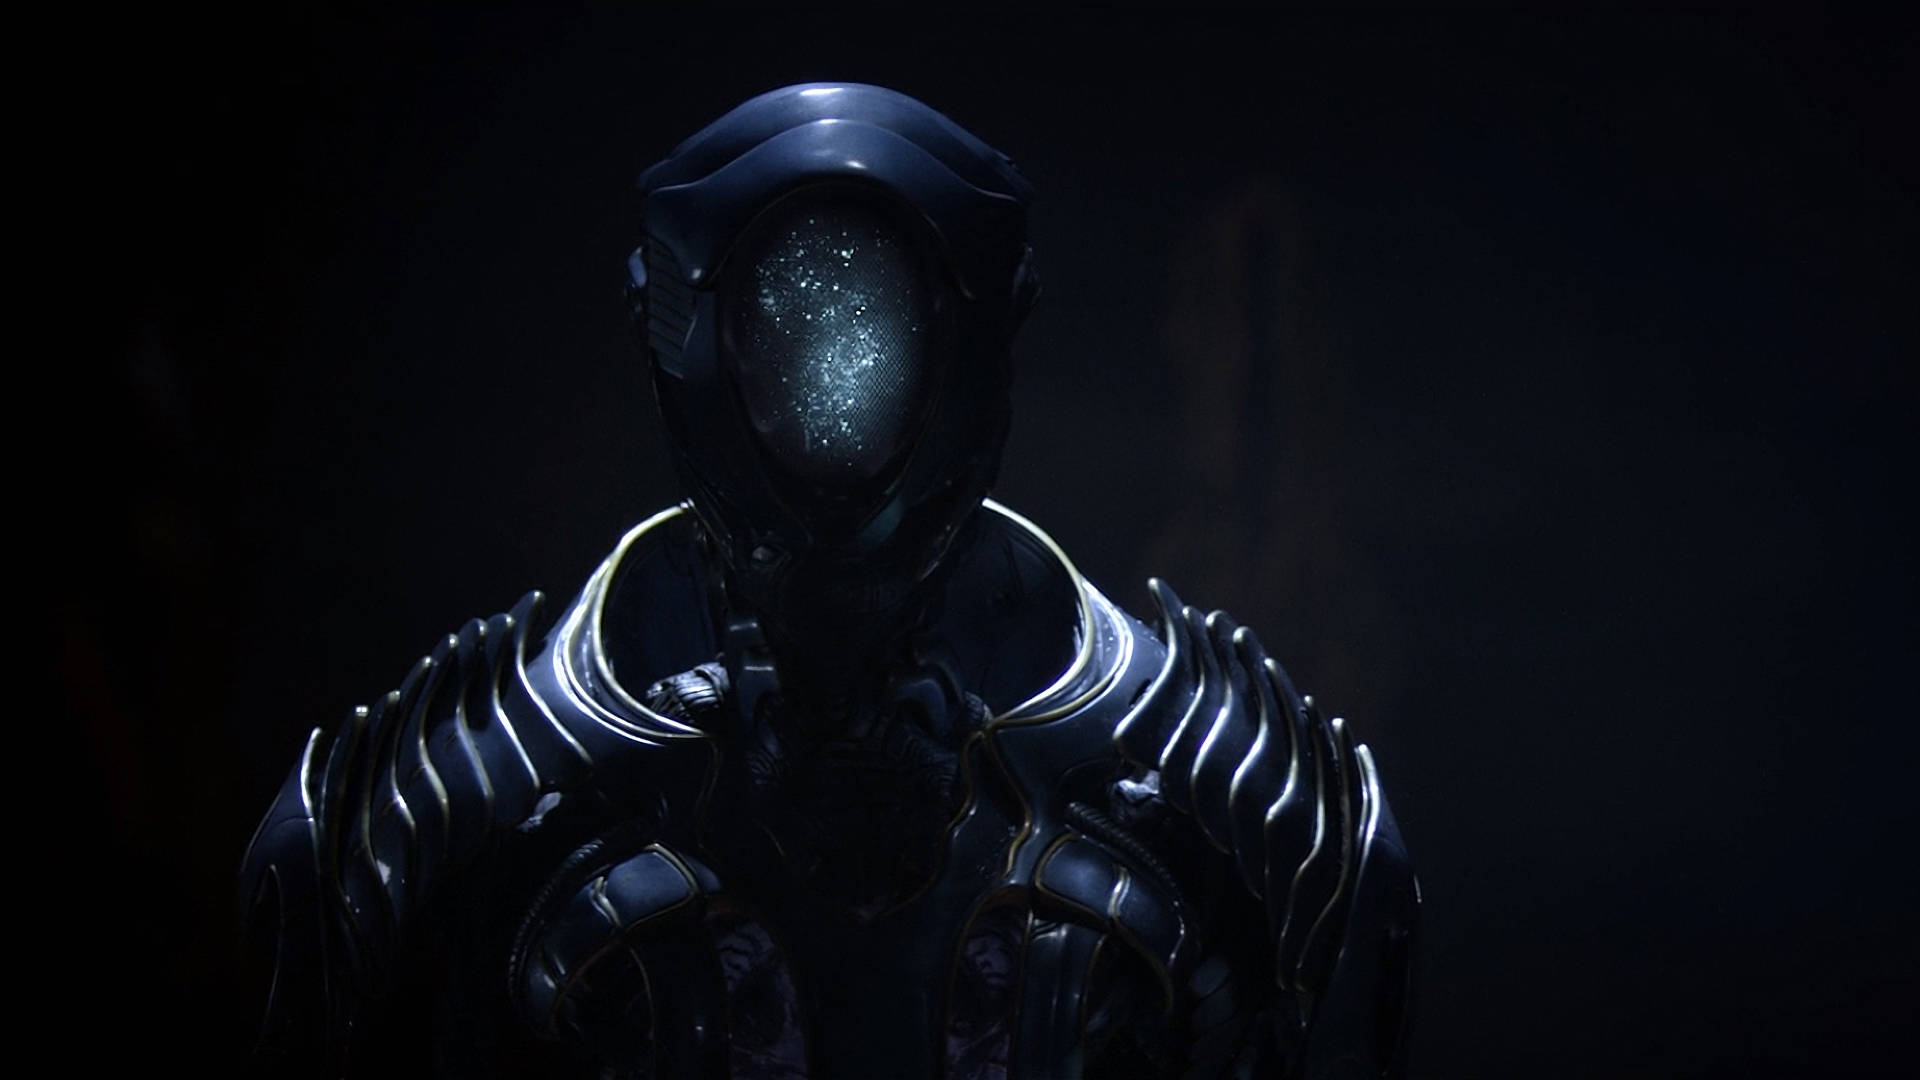 Robotermodellb-9 In Lost In Space. Wallpaper